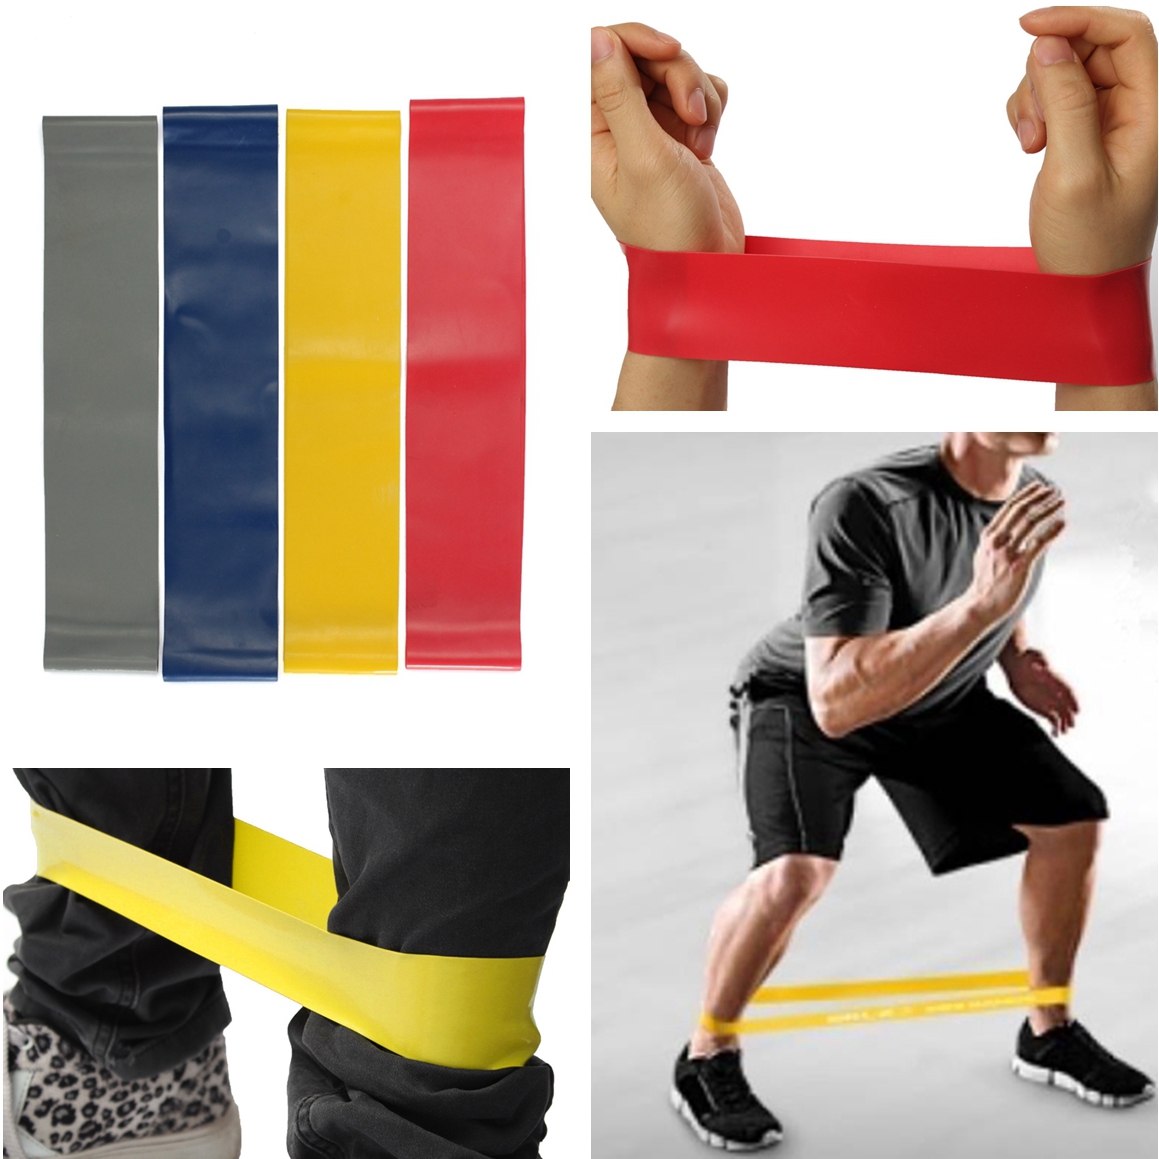 Tension-Resistance-Band-Exercise-Loop-Crossfit-Strength-Training-Fitness-975243